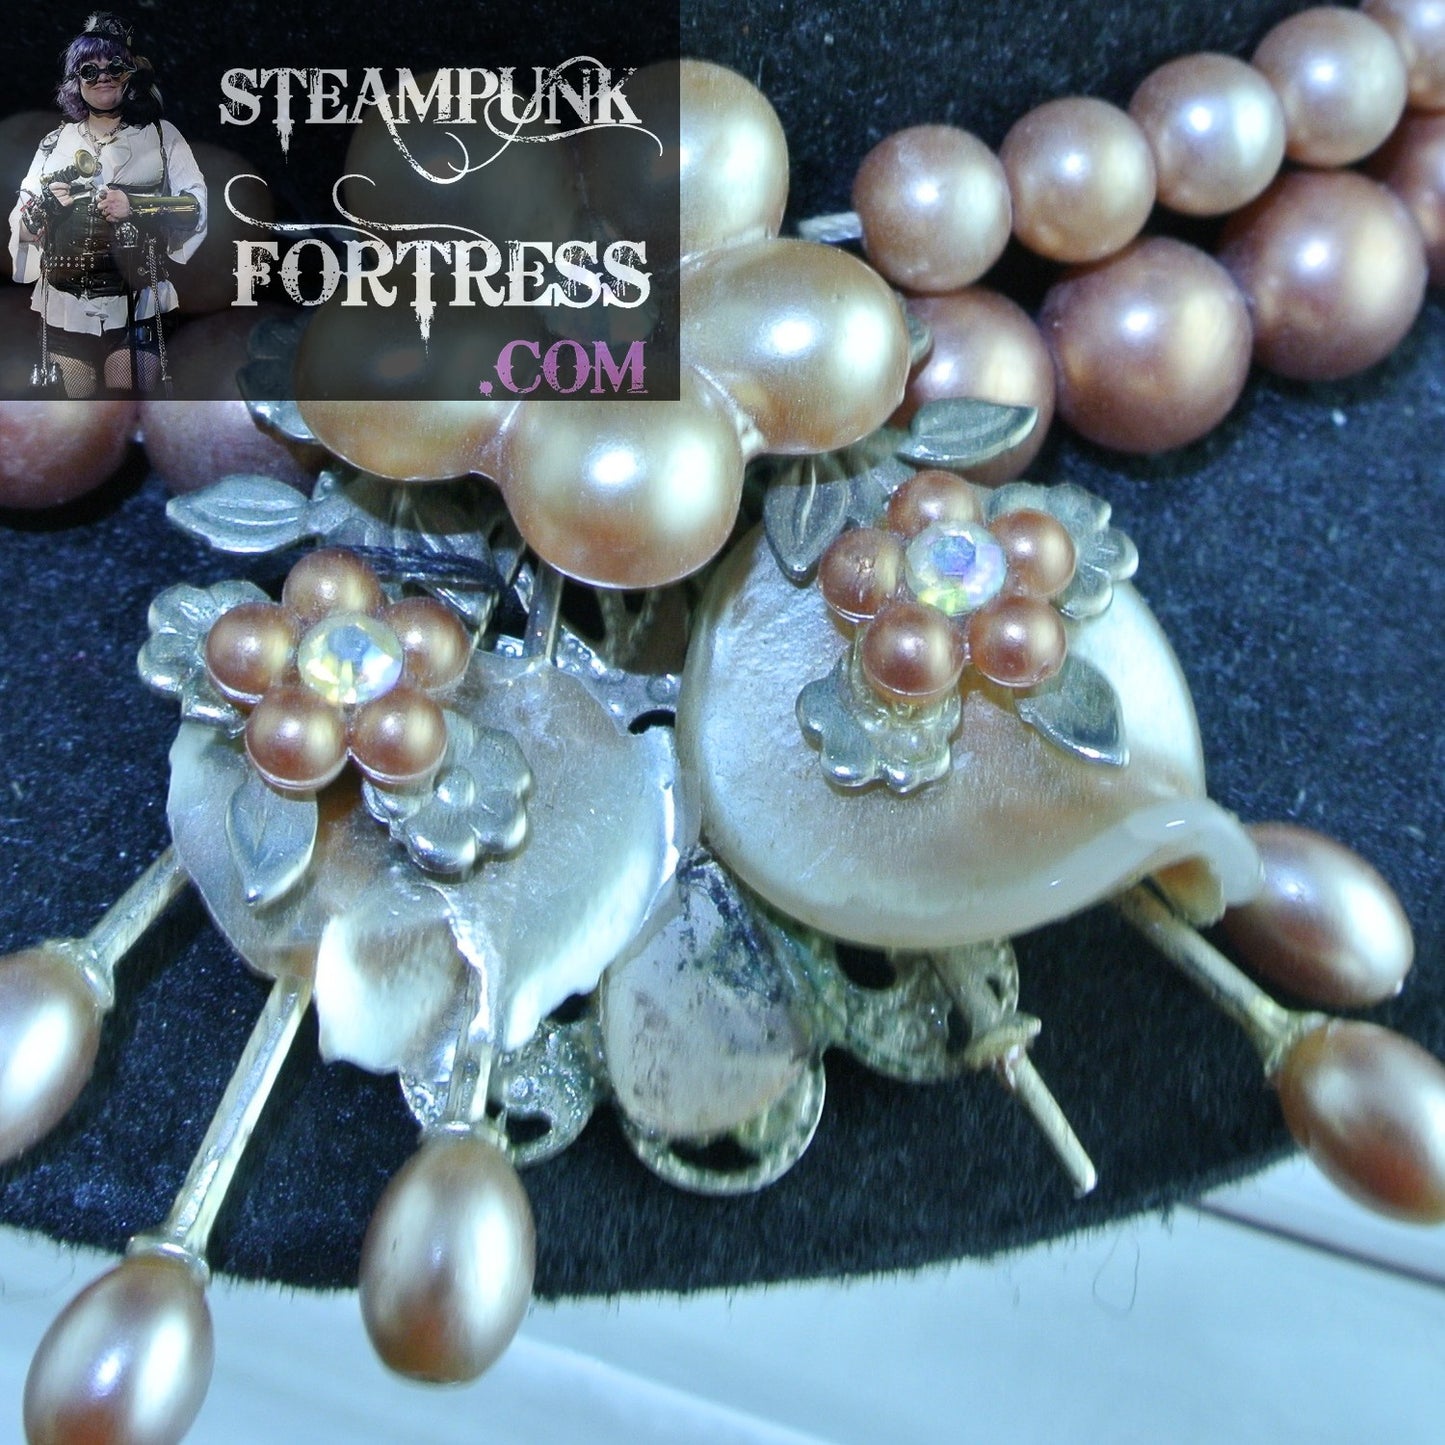 BLACK HAT 2 STRAND VINTAGE PEACH PEARL NECKLACE REMOVABLE BAND DUAL USE BLACK LARGE TOP HAT STARR WILDE STEAMPUNK FORTRESS